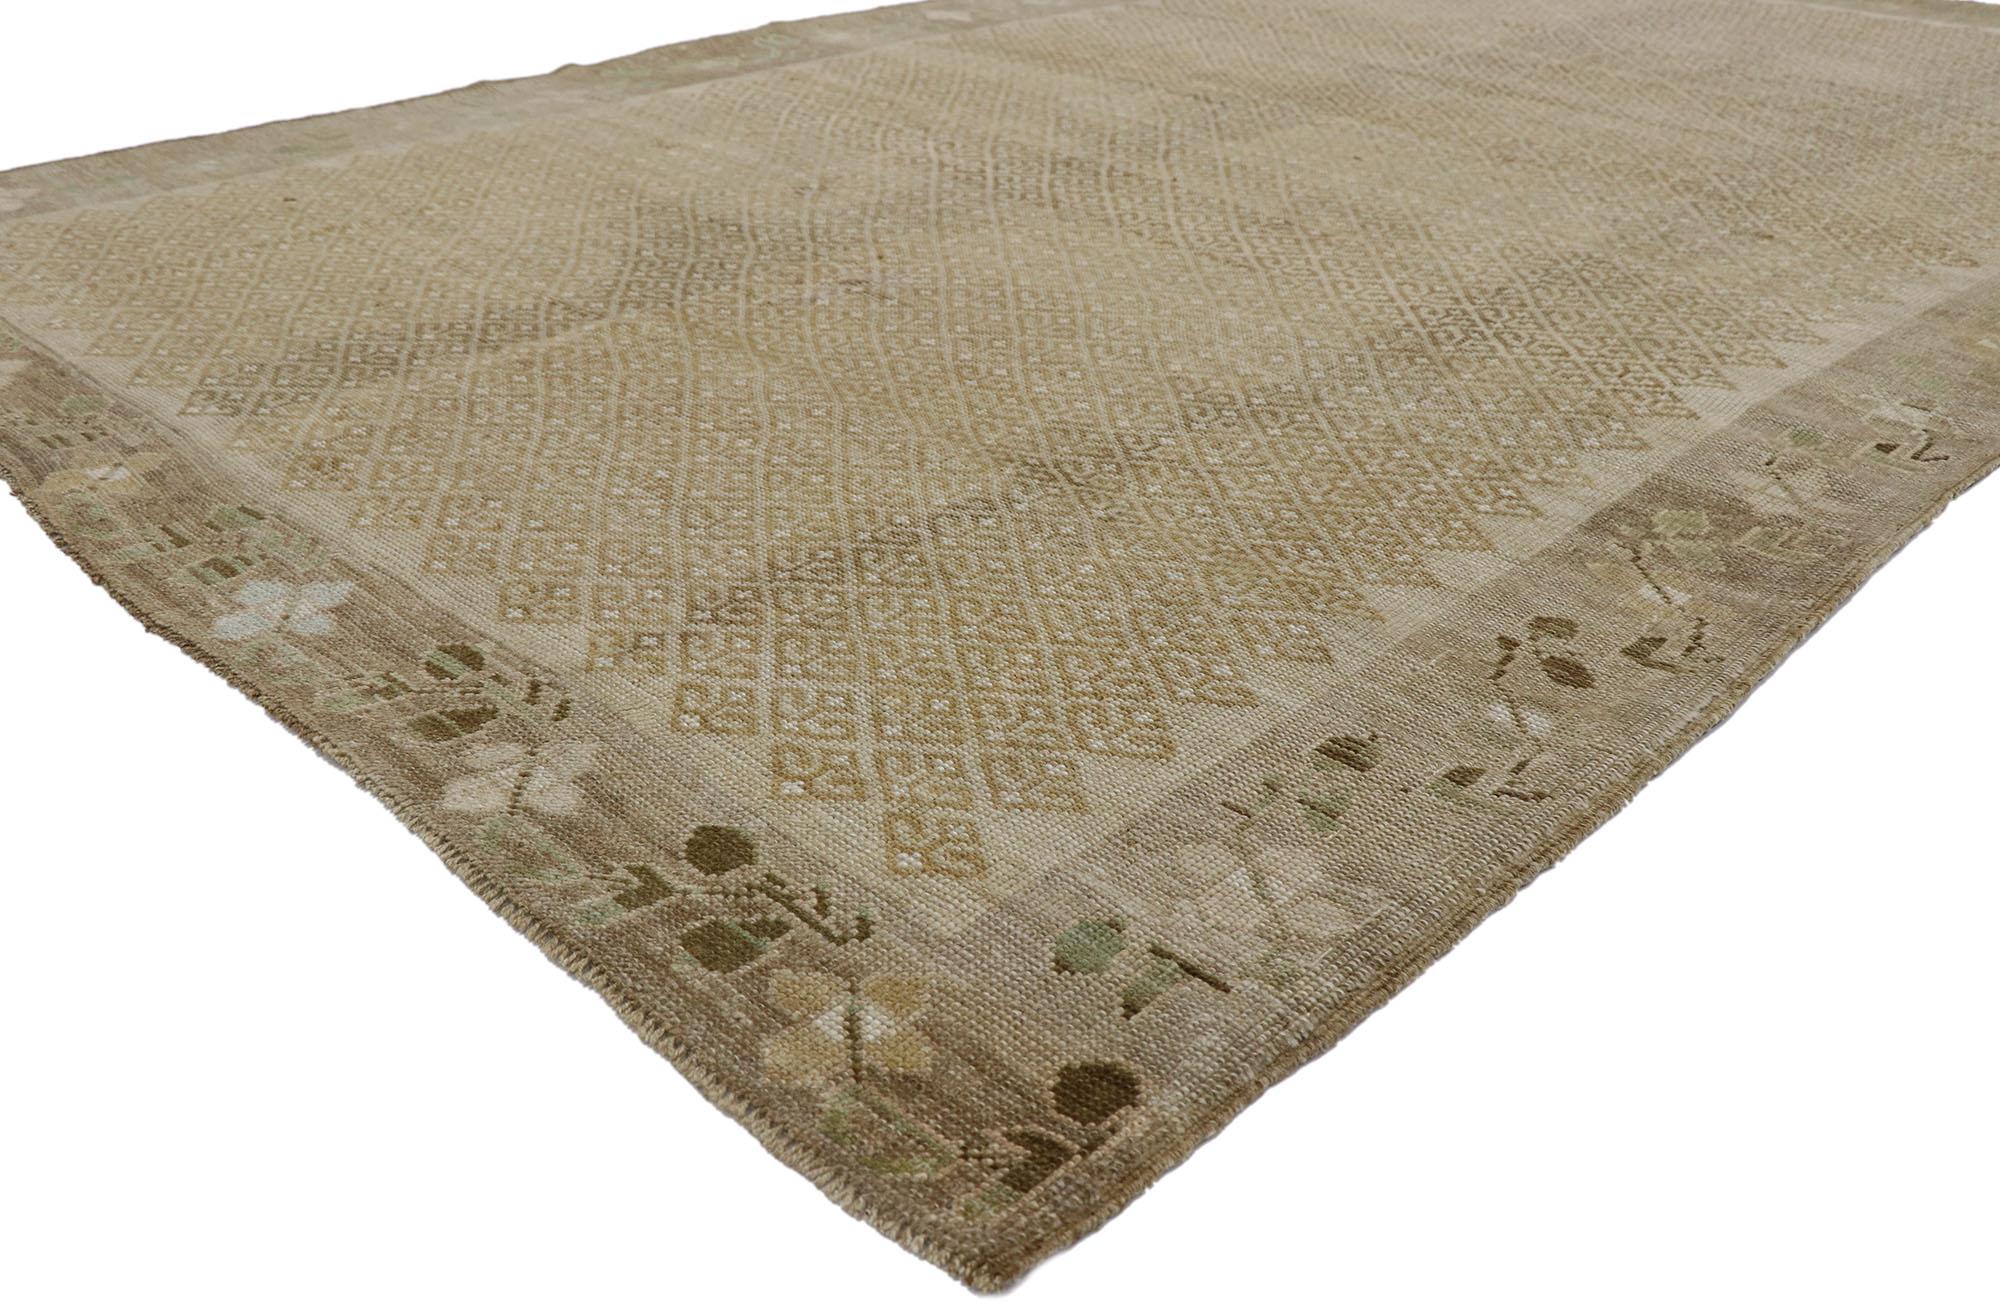 53567 Vintage Turkish Kars Rug with Mid-Century Modern Style 06'02 x 09'07. With its warm hues and beguiling beauty, this hand-knotted wool vintage Turkish Kars rug will take on a curated lived-in look that feels timeless while imparting a sense of